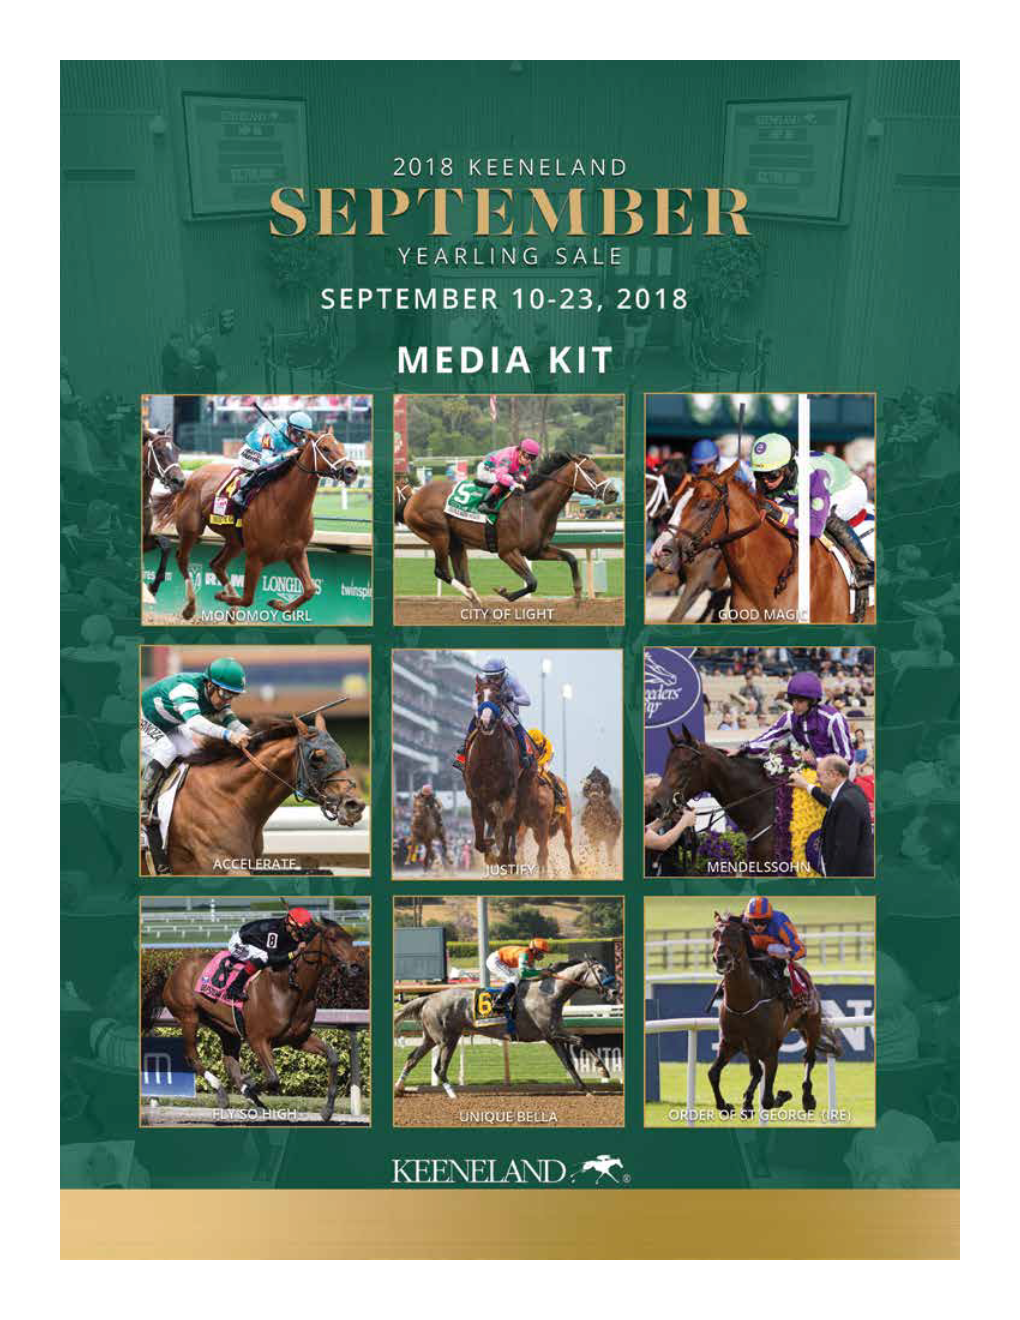 SEPTEMBER SALES GRADUATES — Graded Stakes Winners Sold 2013–2017 2018 Stakes Winners Through Sept